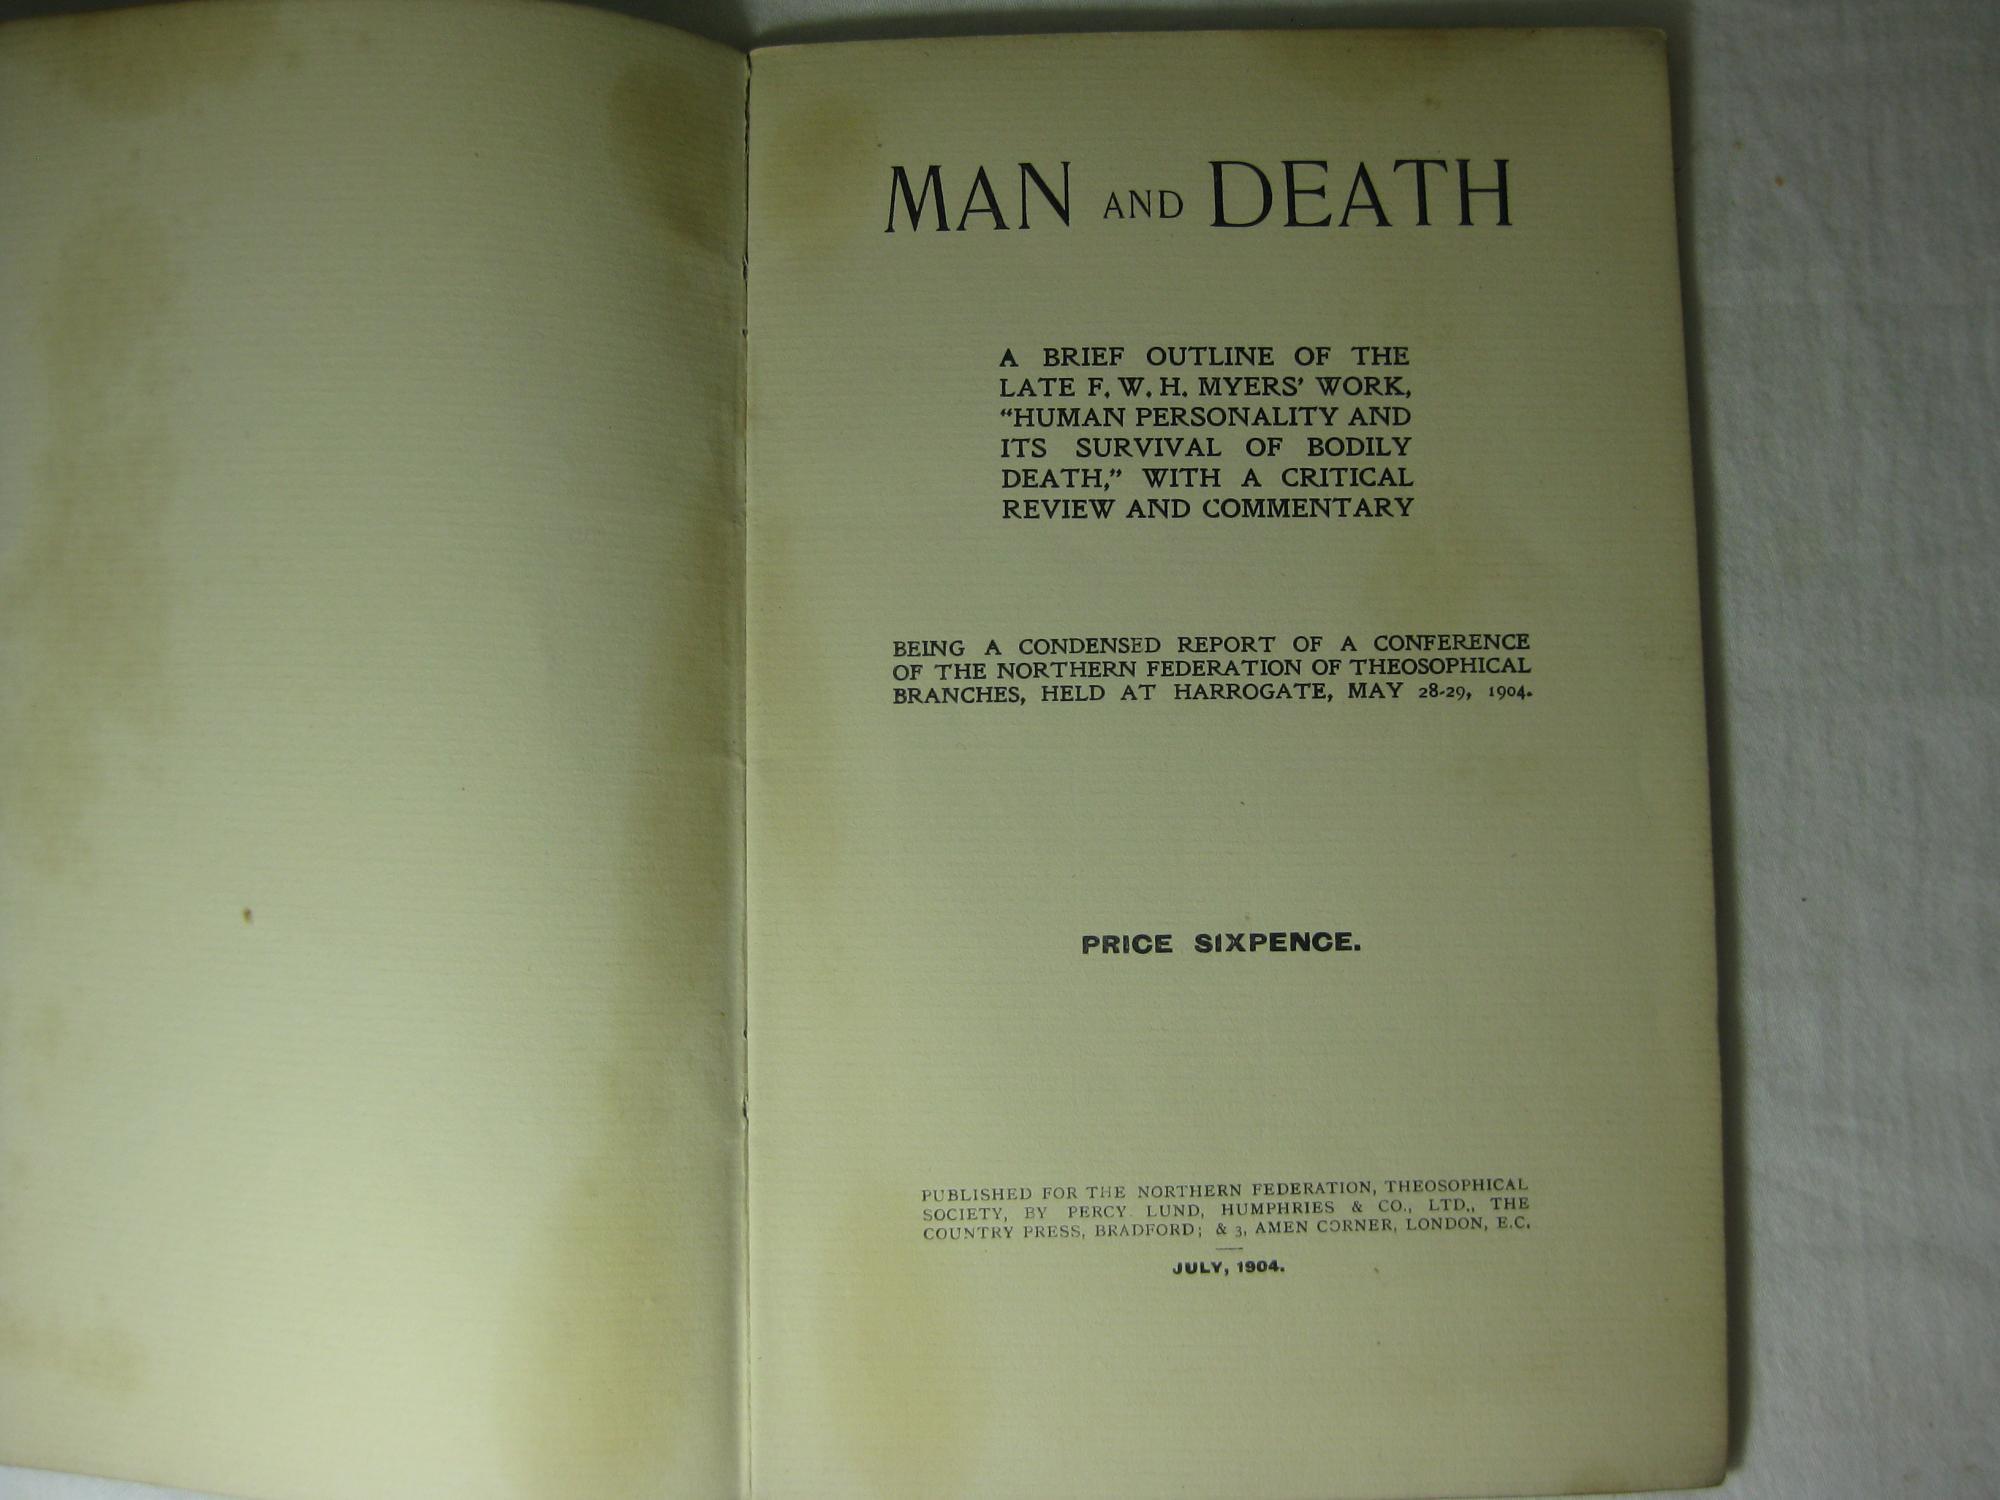 MAN AND DEATH. A BRIEF OUTLINE OF THE LATE F. W. H. MYERS' WORK, 